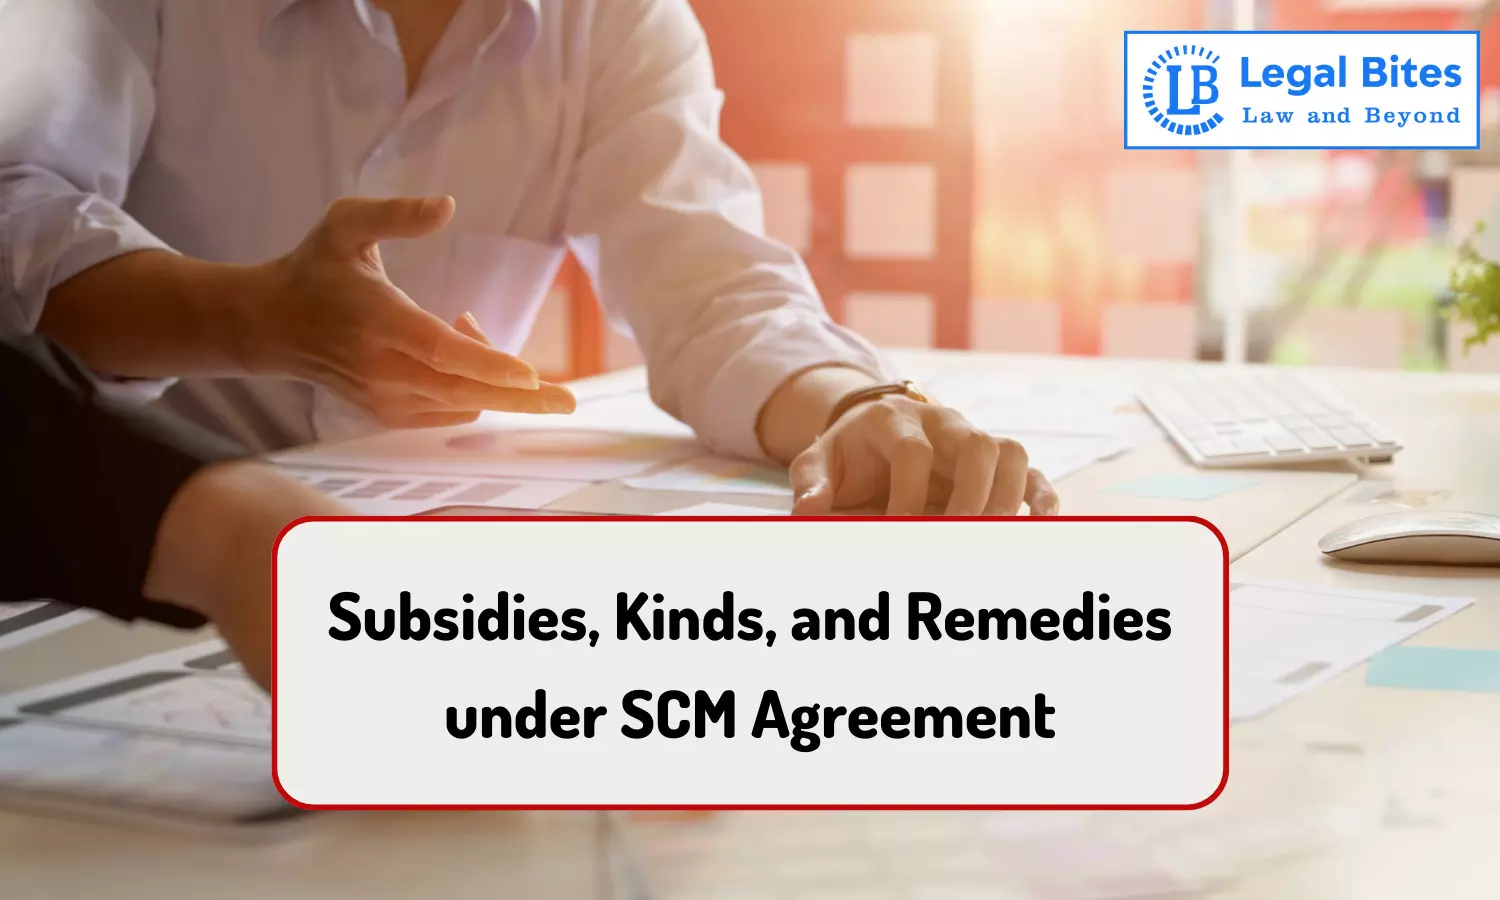 Subsidies, Kinds, and Remedies under SCM Agreement